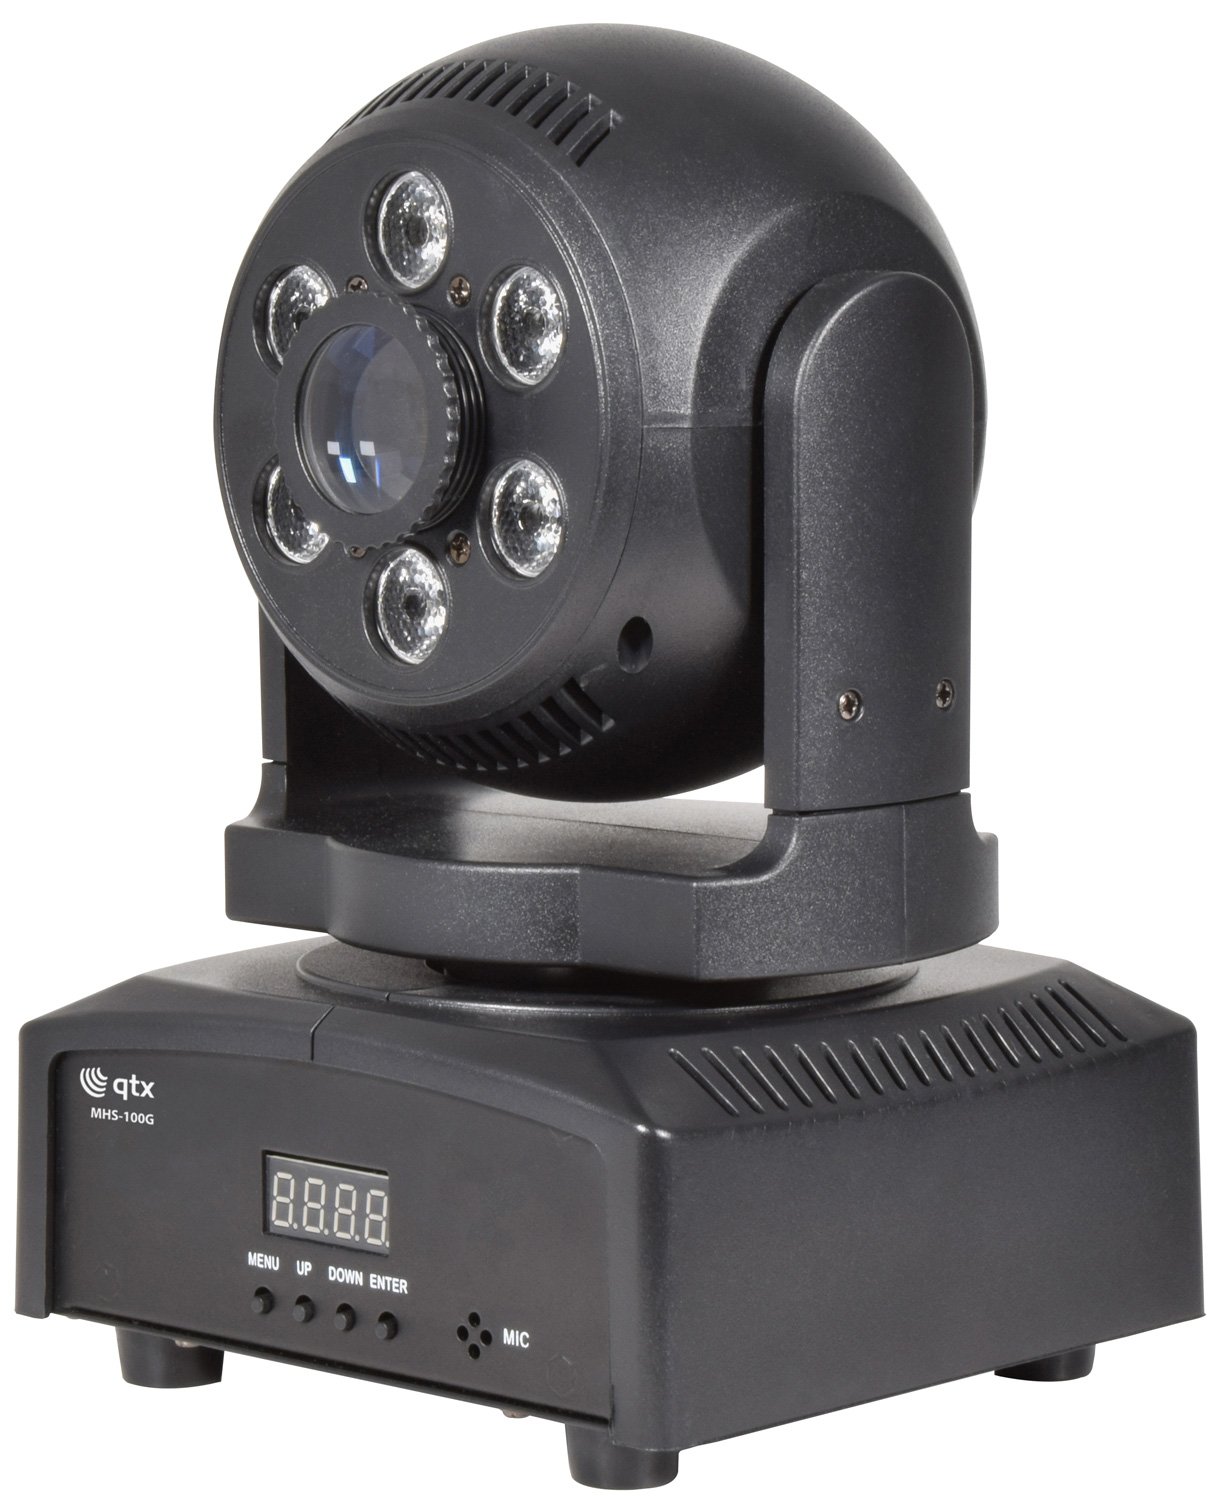 GOBO Spotwash: 100W LED Moving Head with GOBOs Spot Wash LED Moving Head